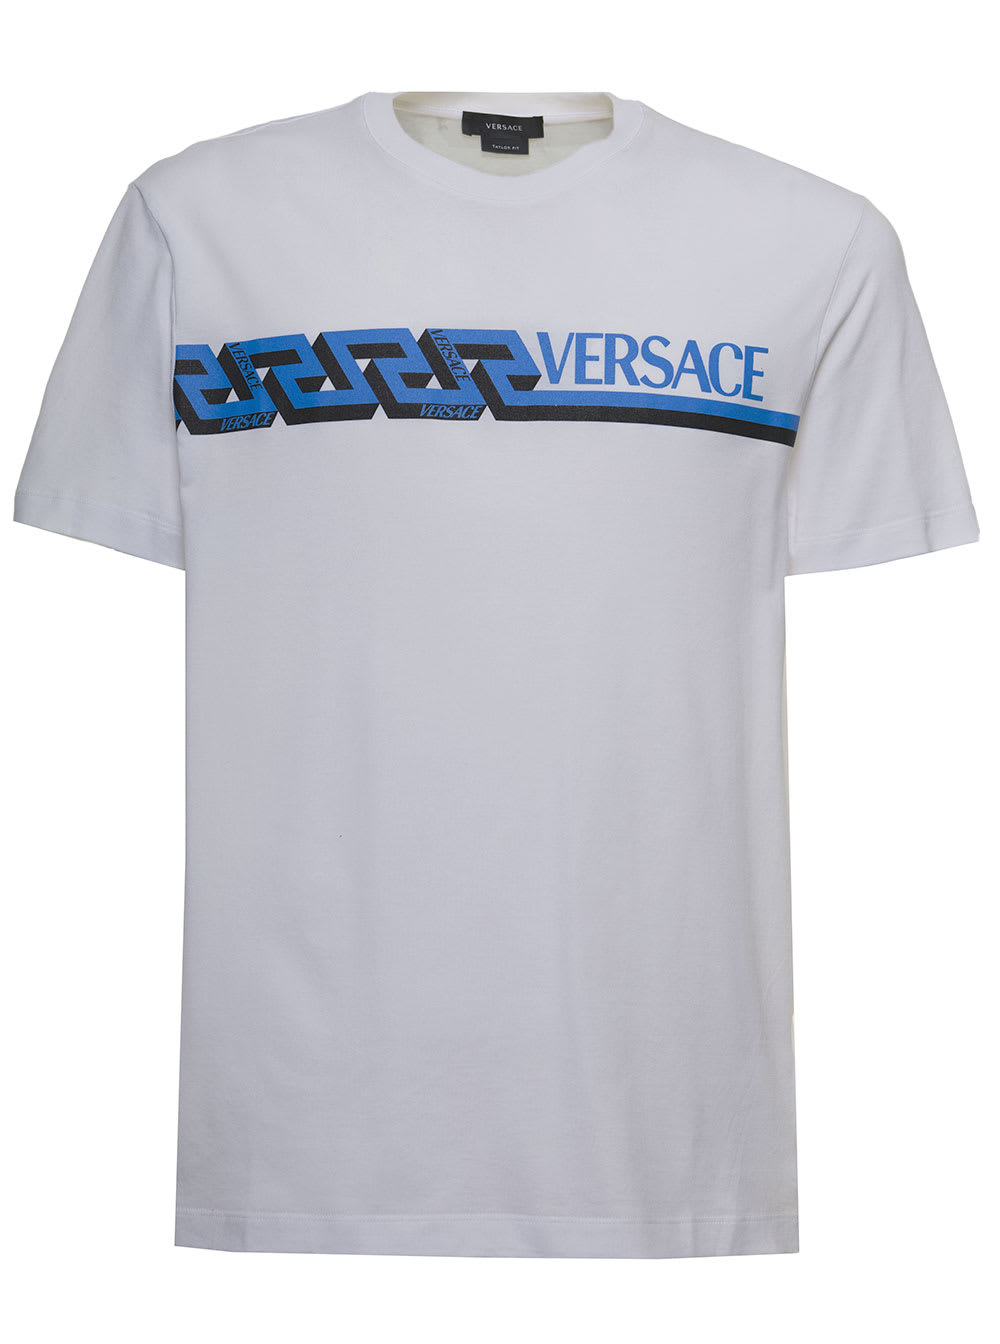 Versace White Cotton T-shirt With Signature Greek Print